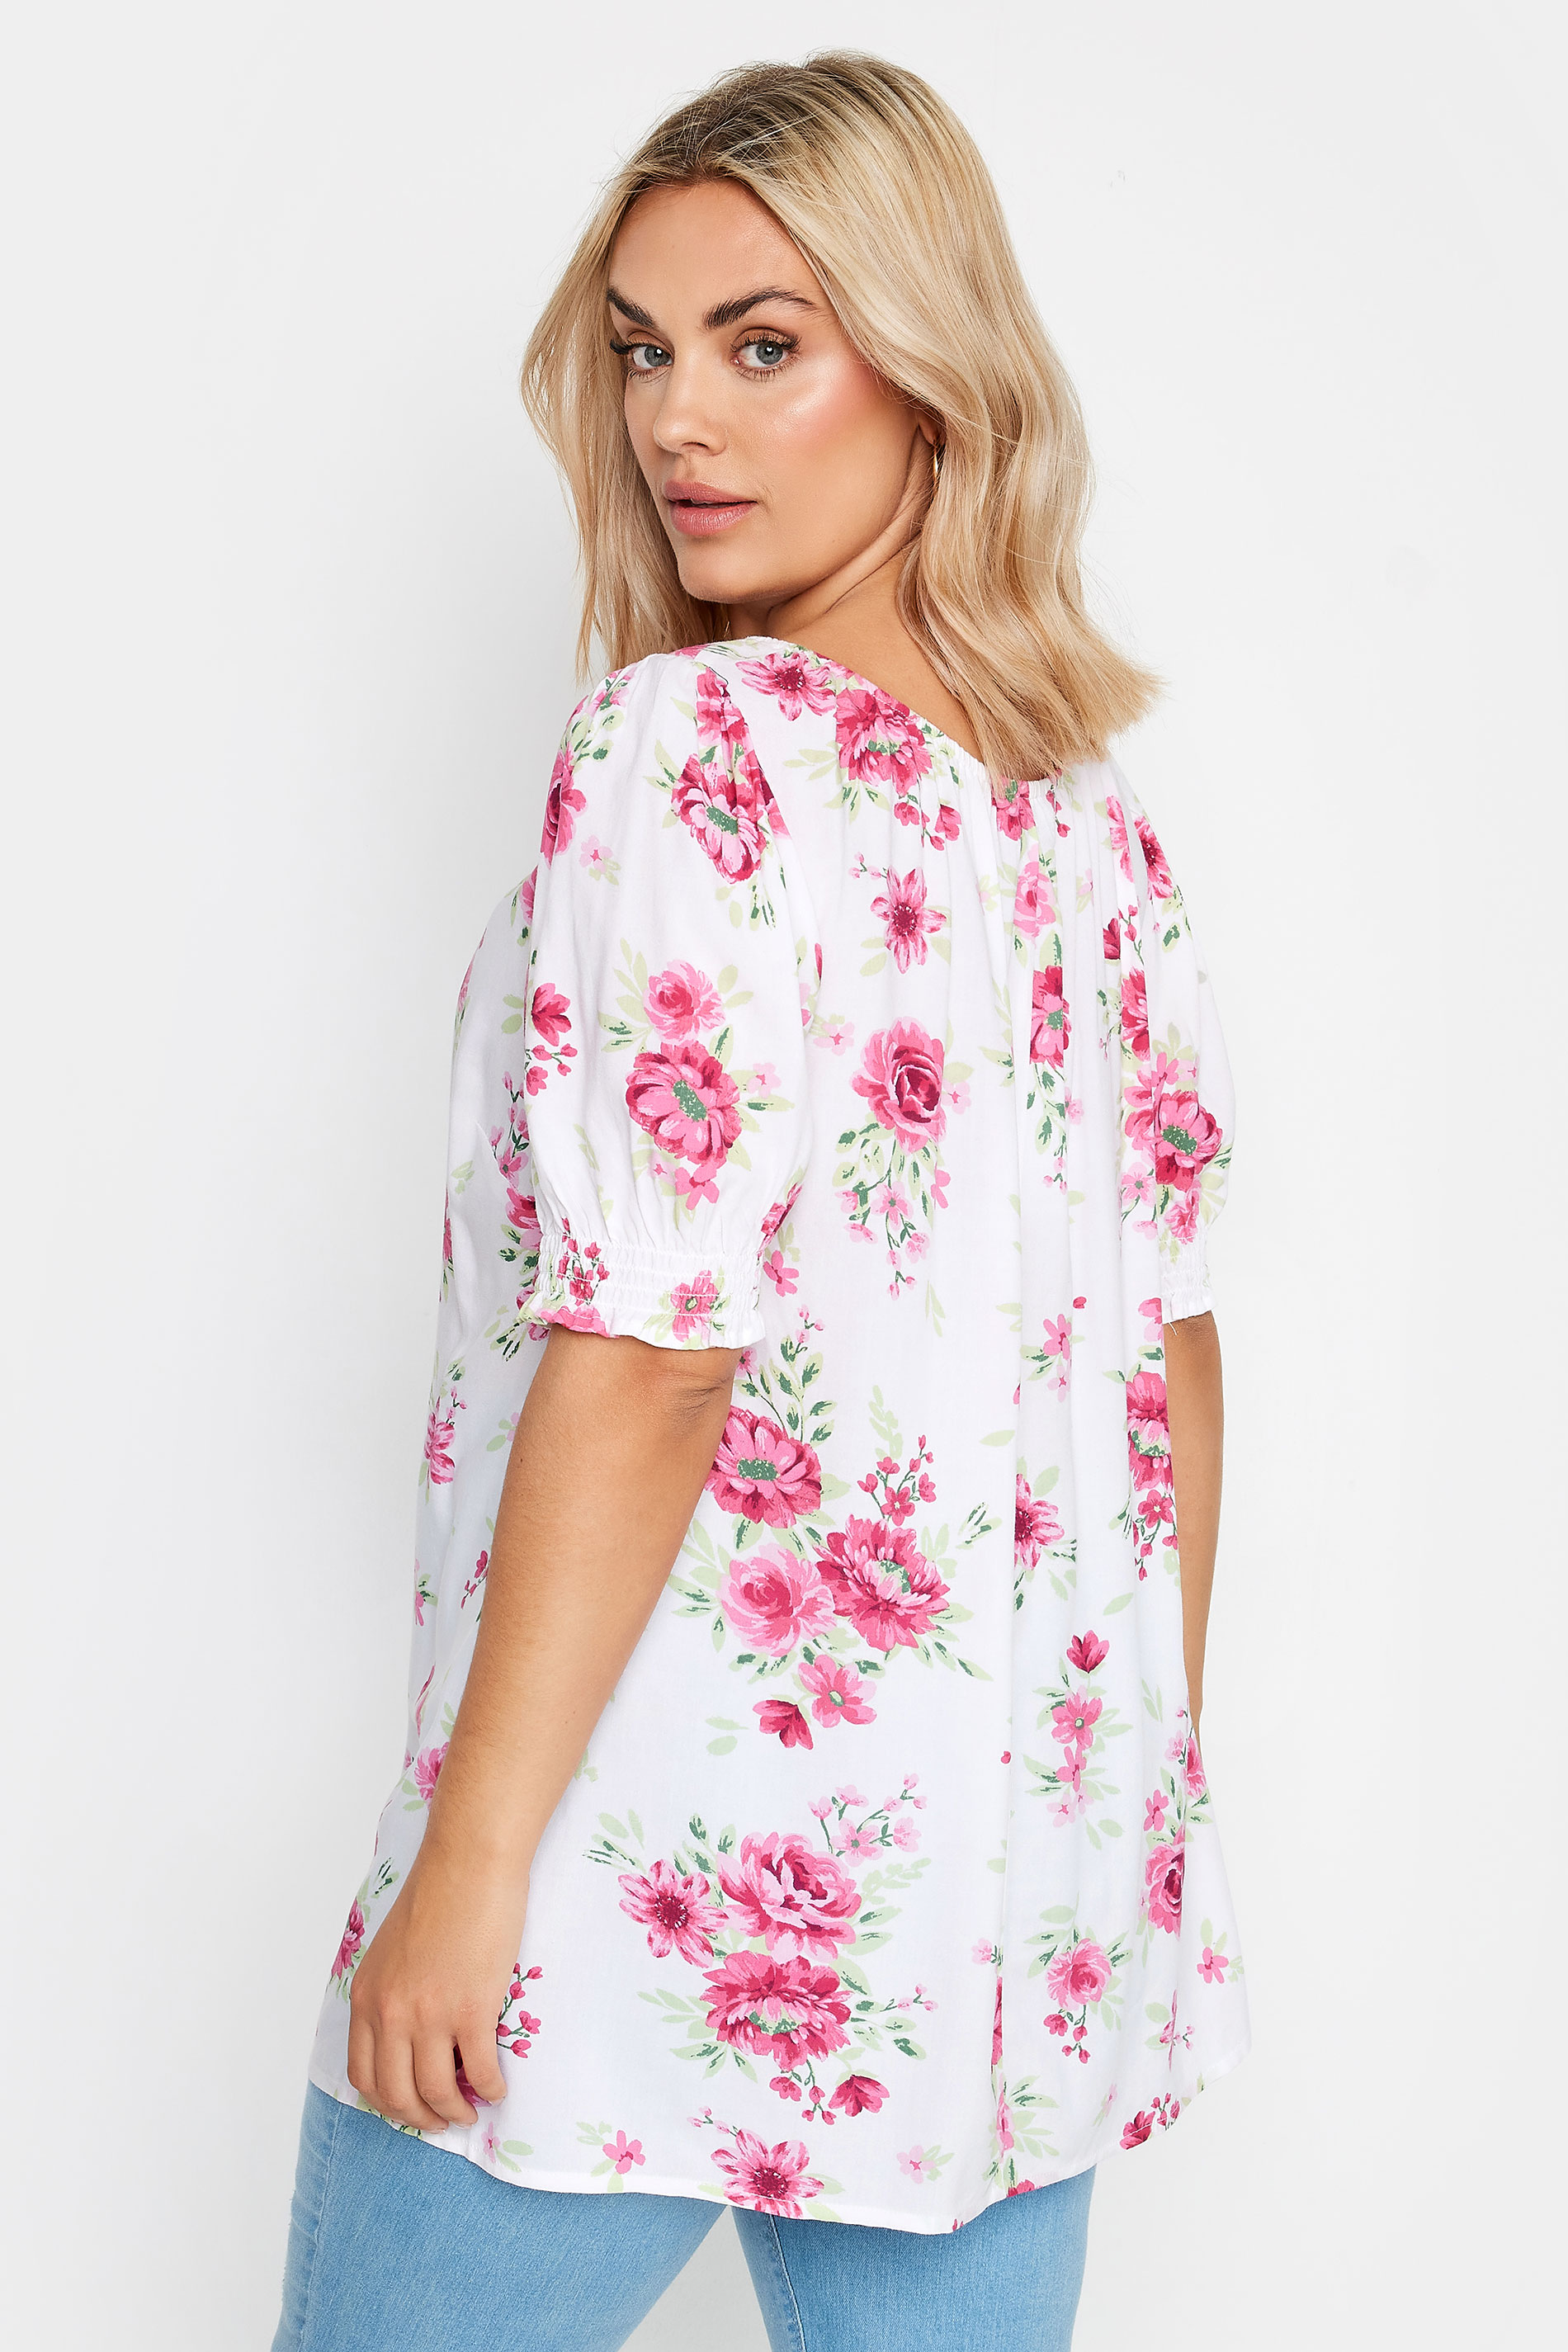 YOURS Plus Size White & Pink Floral Print Tie Neck Top | Yours Clothing 3